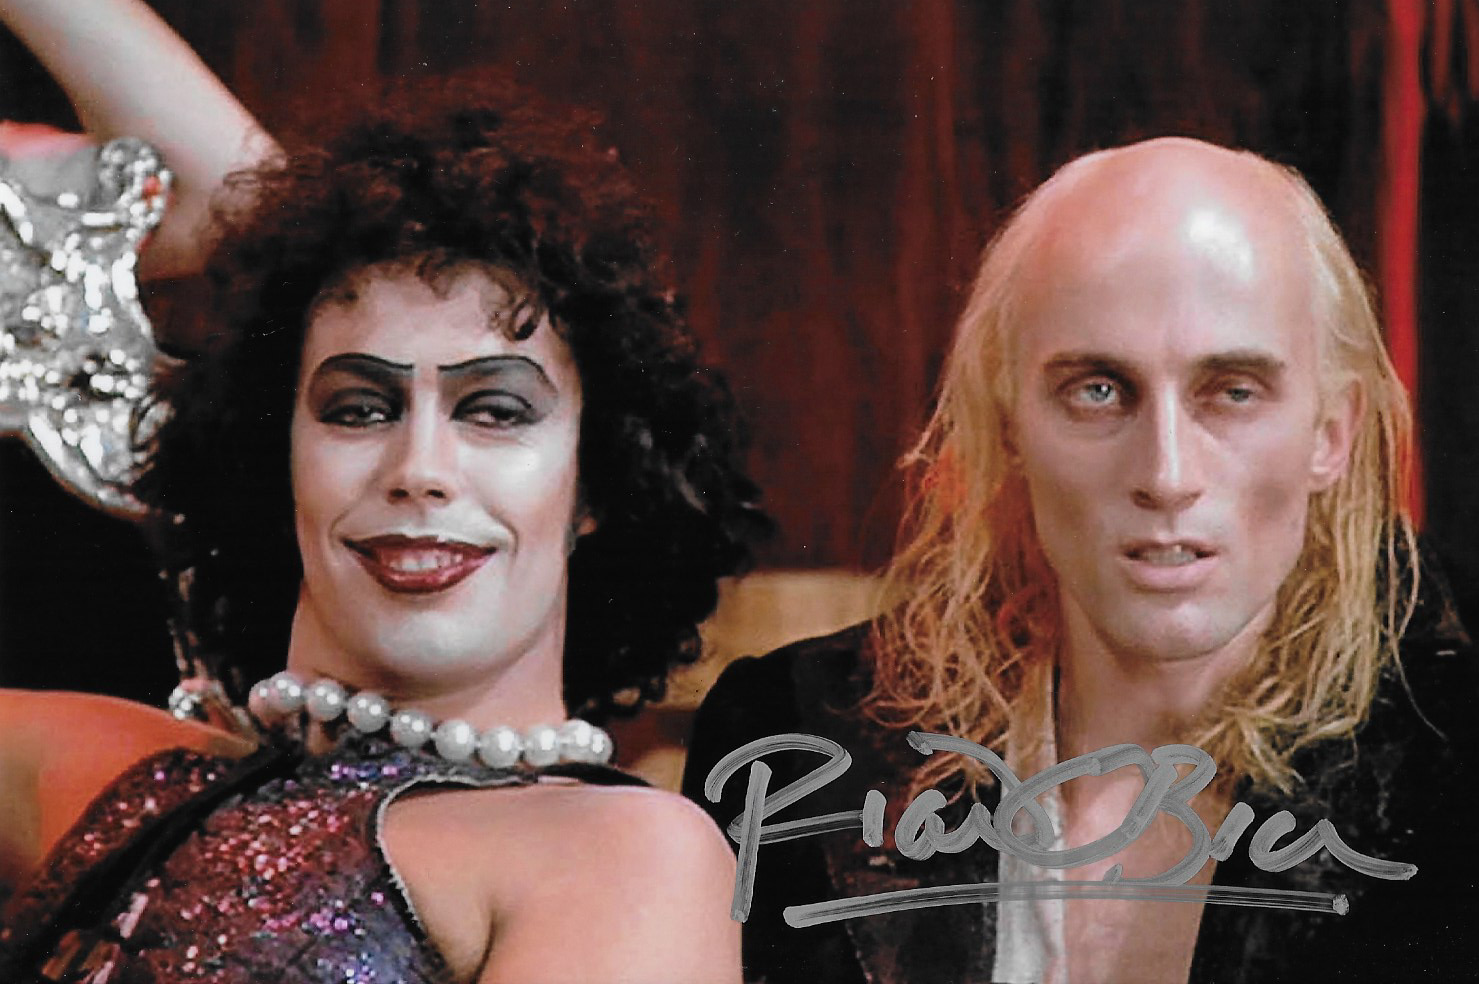 Richard O Brien Actor The Rocky Horror Show Signed 7.5 x 5 Photograph *With COA*